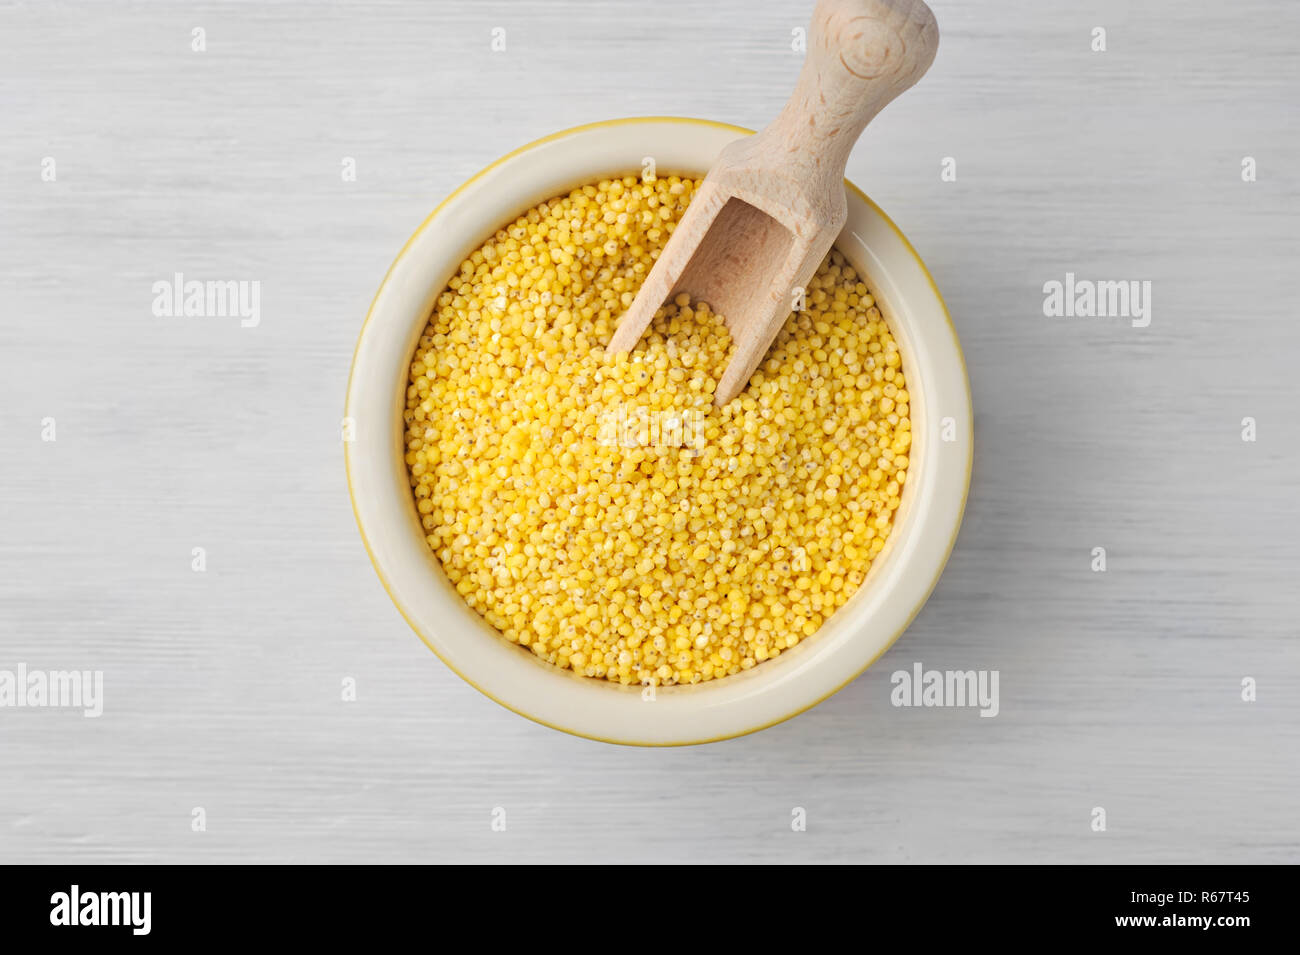 Organic millet seeds in a ceramic bowl on wooden white rustic table.Grain with its mildly sweet flavor, is tasty, soothing, non-acid forming. Stock Photo